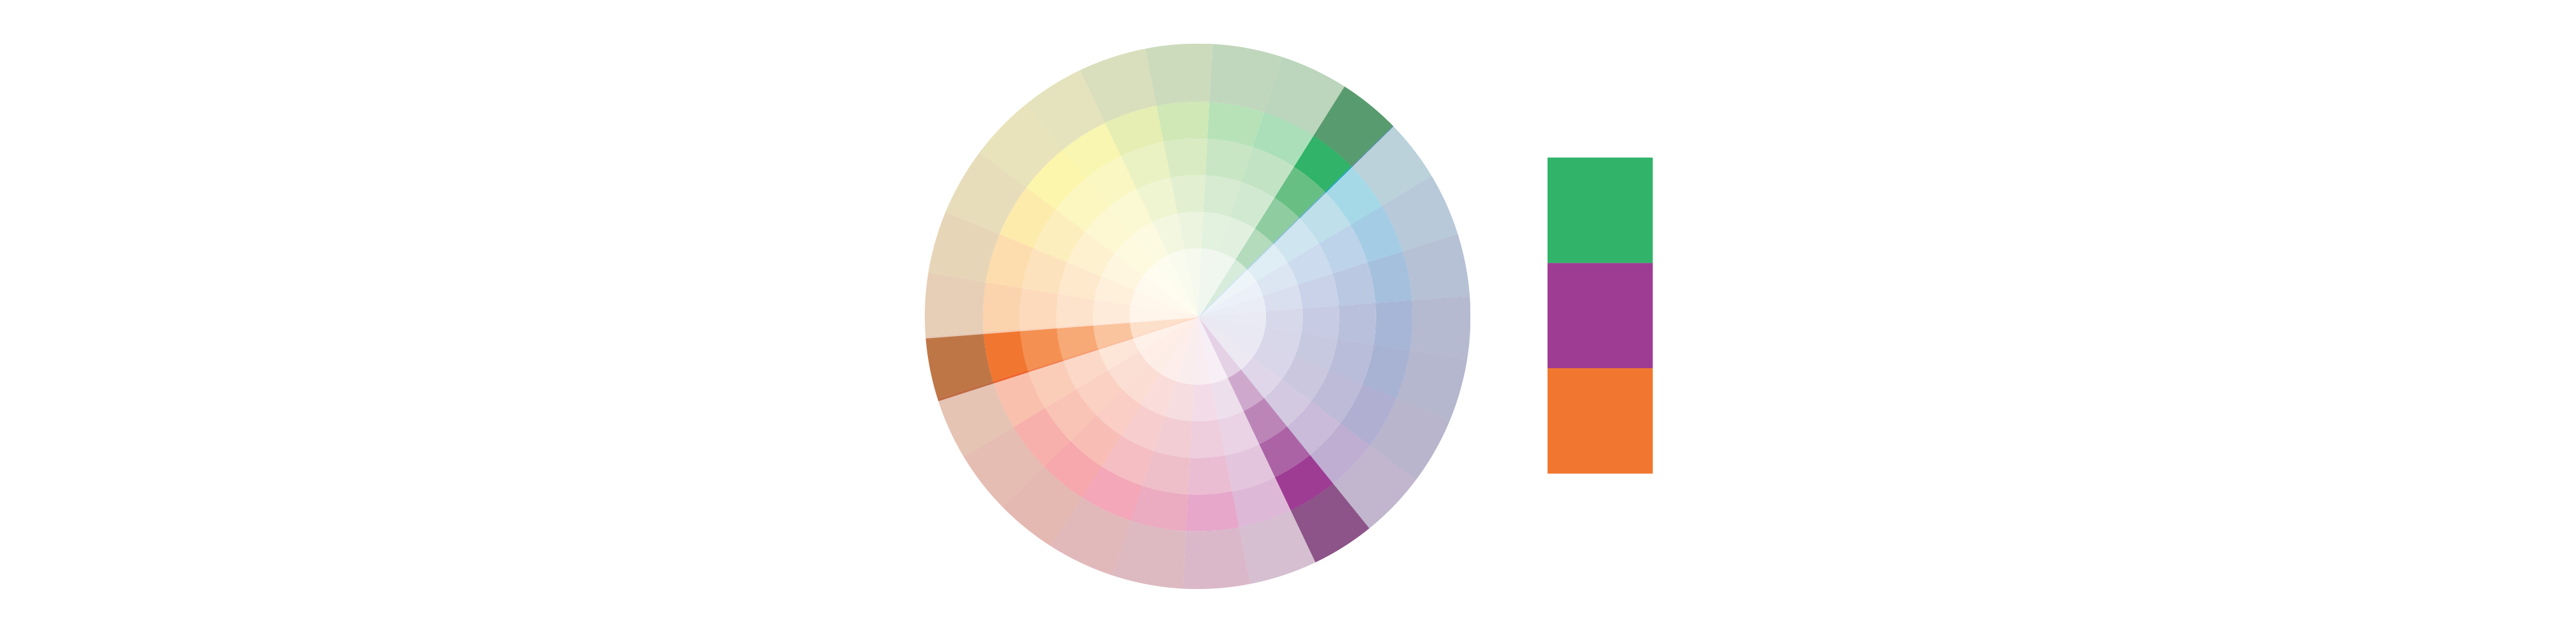 Colour wheel with 6 rings circling around its centre, where each ring gets darker as it gets closer to the outside of the circle. The slices of the colour wheel are yellow, orange, red, purple, blue, and green. All slices are muted except for 3 slices evenly spread out around the circle: green, violet, and orange. This highlights a triad colour combination, shown in a colour palette next to the colour wheel.